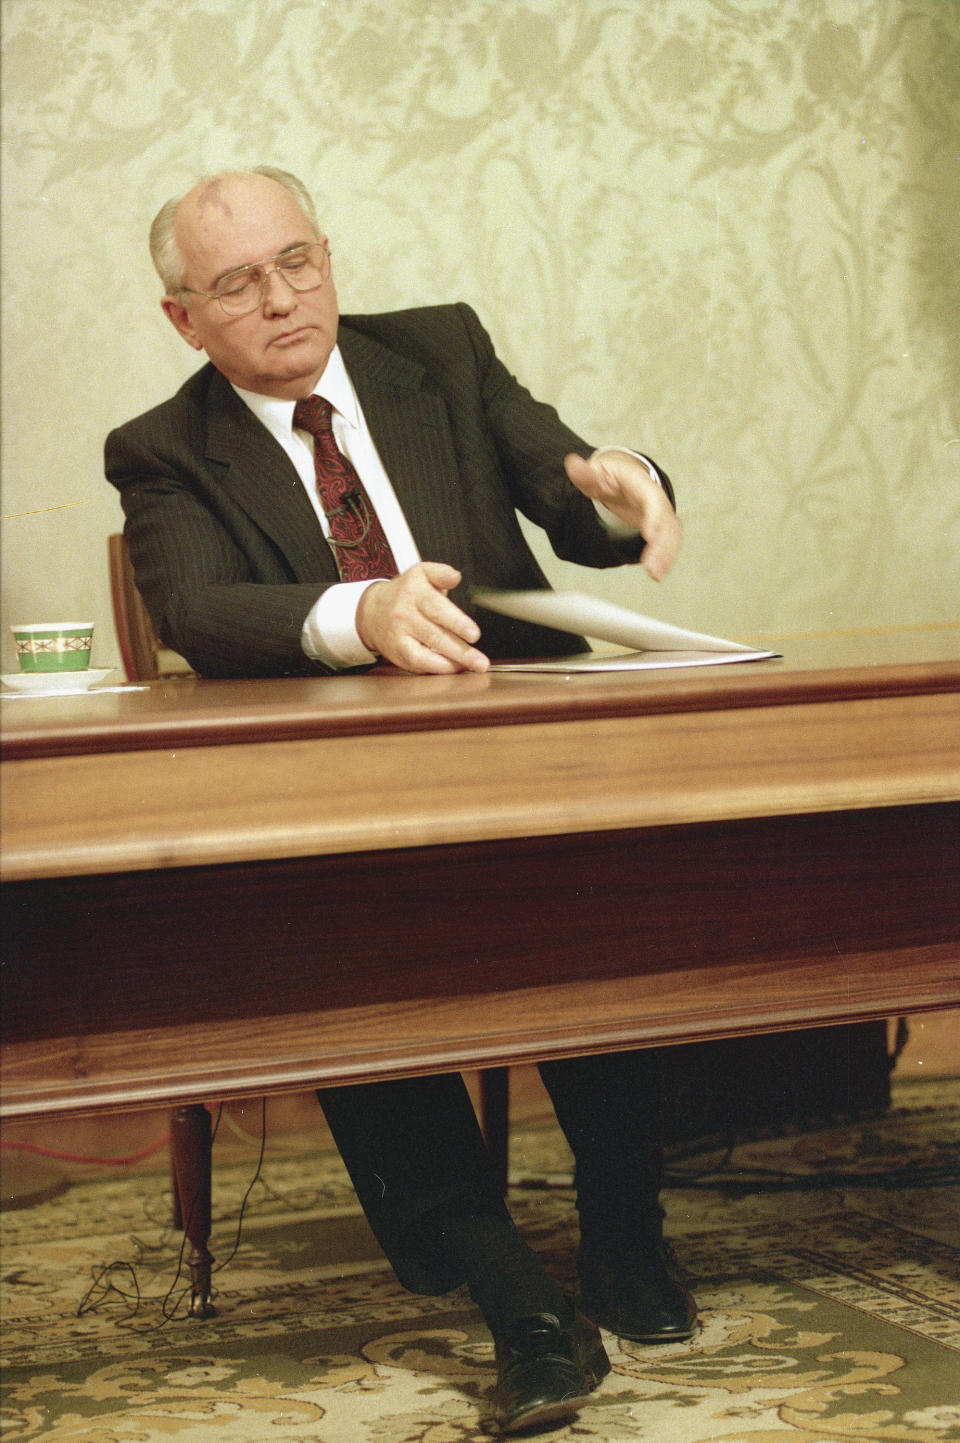 FILE - Mikhail Gorbachev, eighth and final leader of the Soviet Union, closes his resignation speech on the table after delivering it on Soviet television in the Kremlin, Moscow, Wednesday, Dec. 25, 1991, drawing a line under more than 74 years of Soviet history. Shortly thereafter, the Soviet hammer-and-sickle flag was lowered from the Kremlin, and in its place rose the white, blue, and red flag of Russia. (AP Photo/Liu Heung Shing, File)